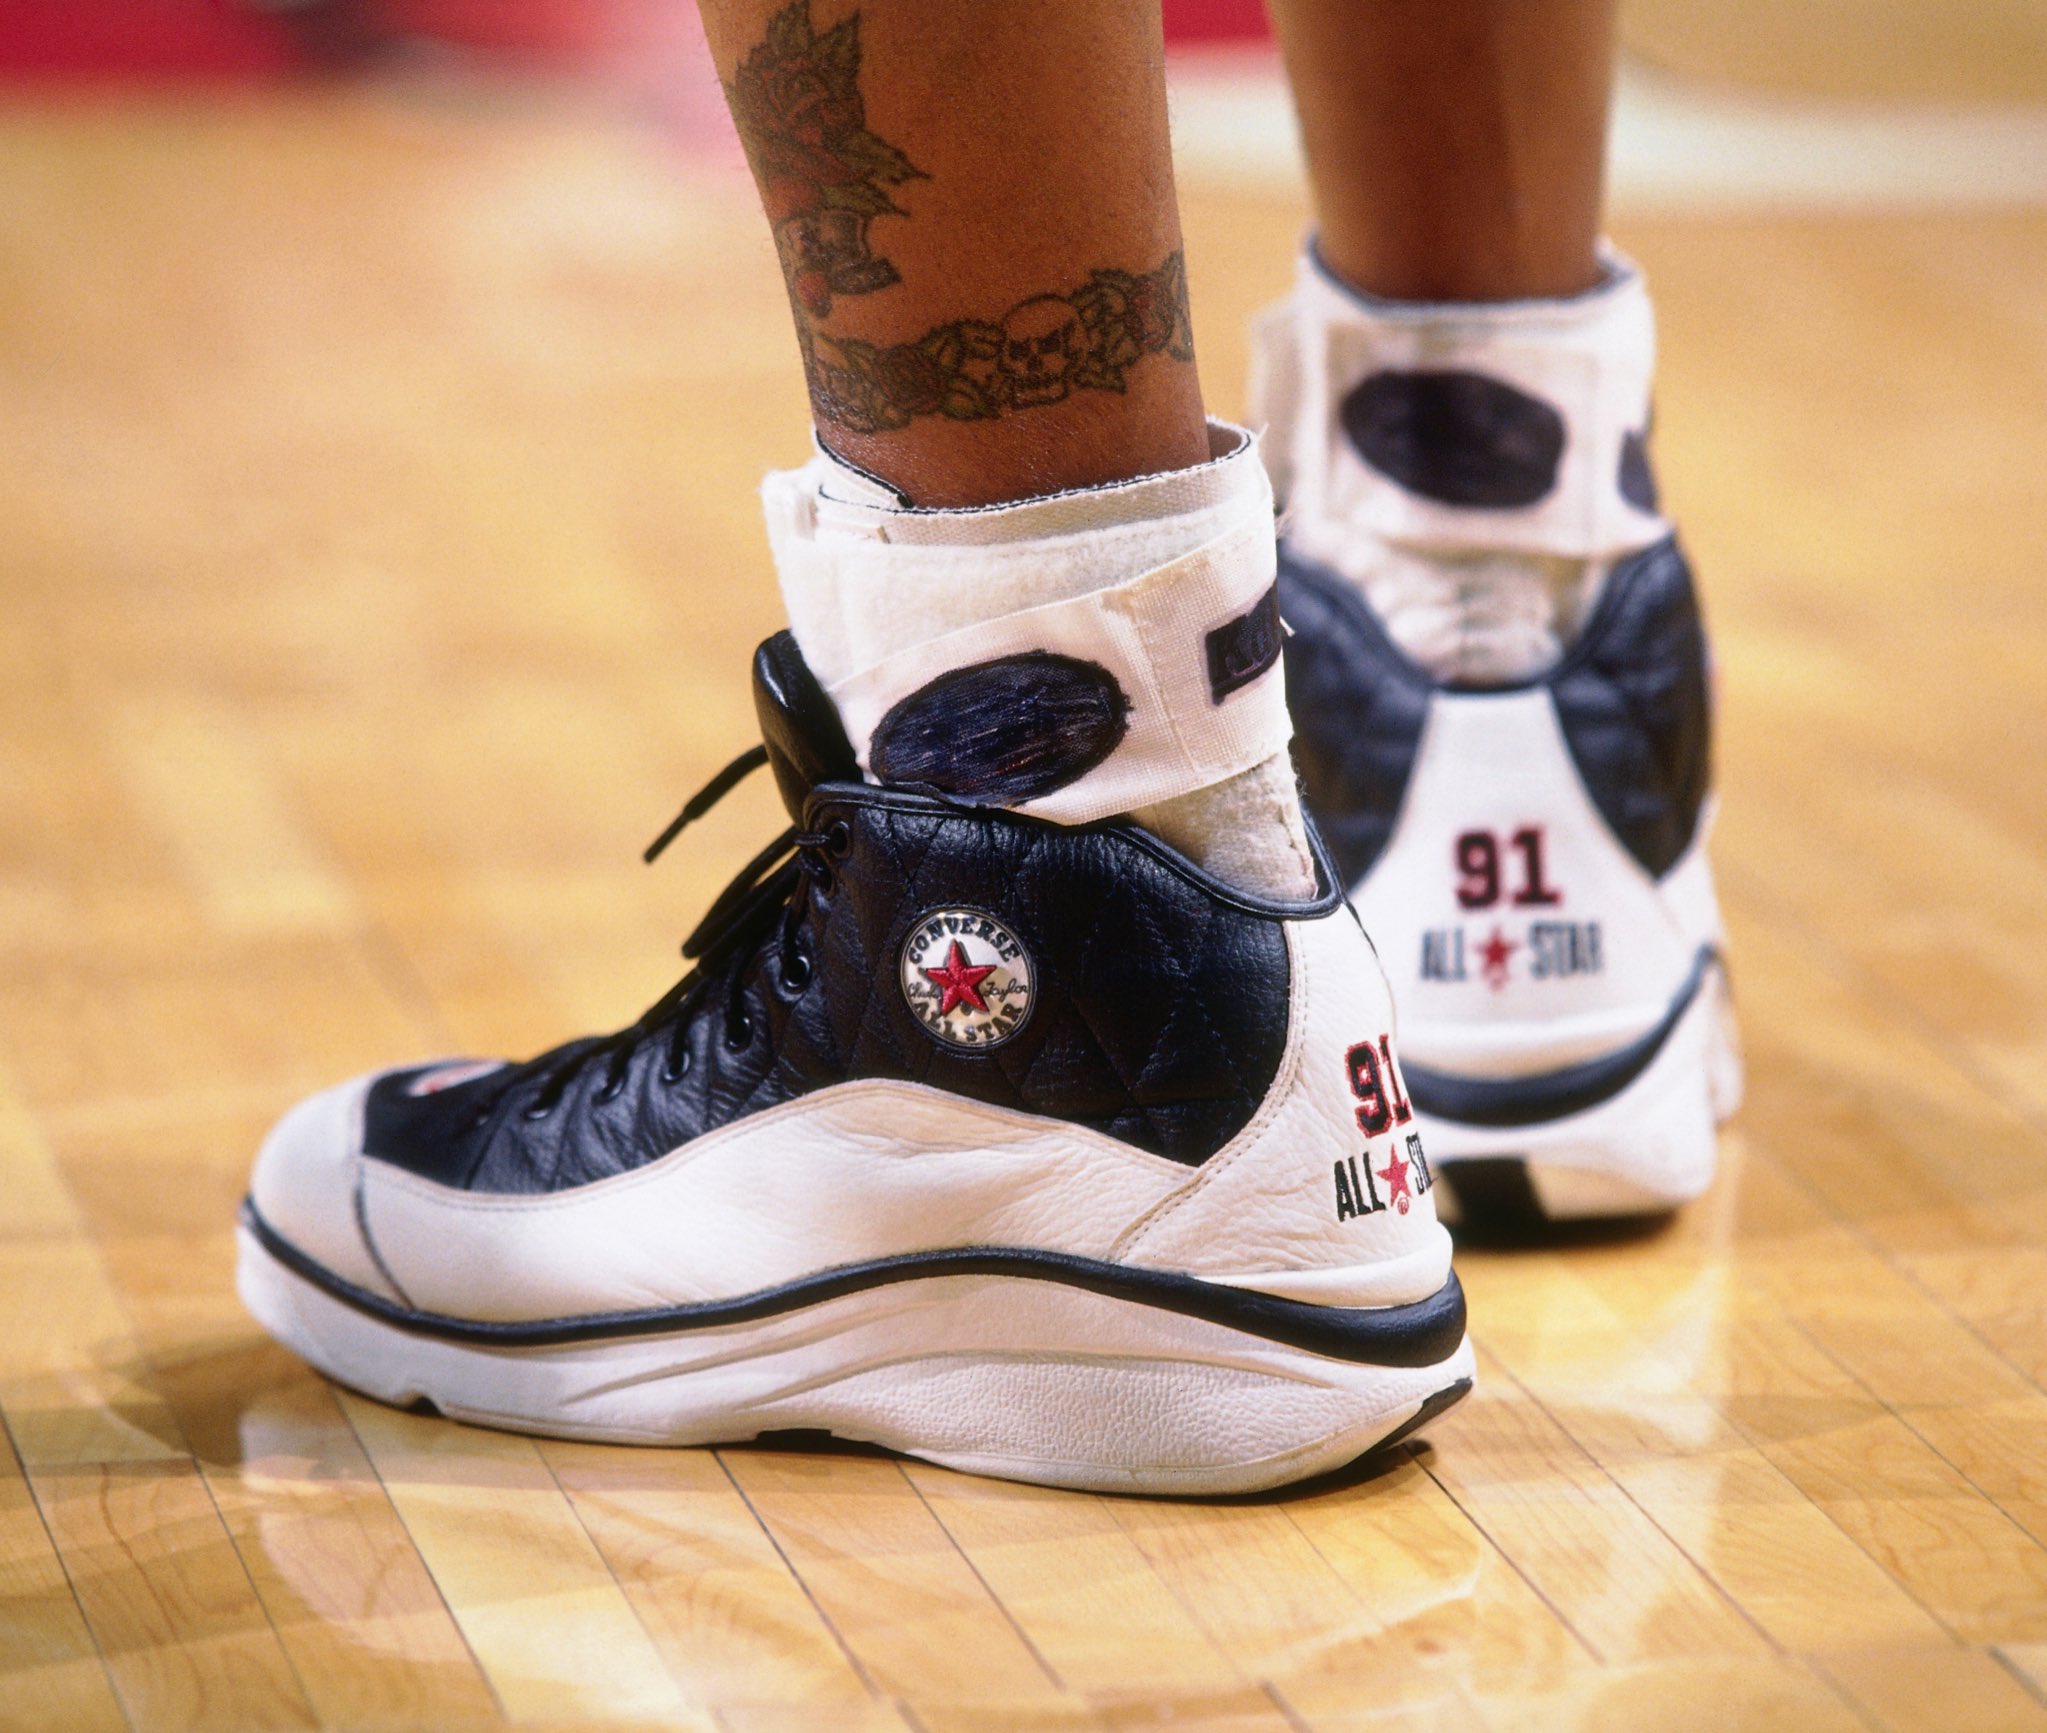 El extraño extraño Escabullirse Nick DePaula on Twitter: "After the 72-10 season, @DennisRodman signed a  signature shoe deal with @Converse. He'd rock the All Star 91, All Star  Rodman &amp; All Star Springfield 91, worn in